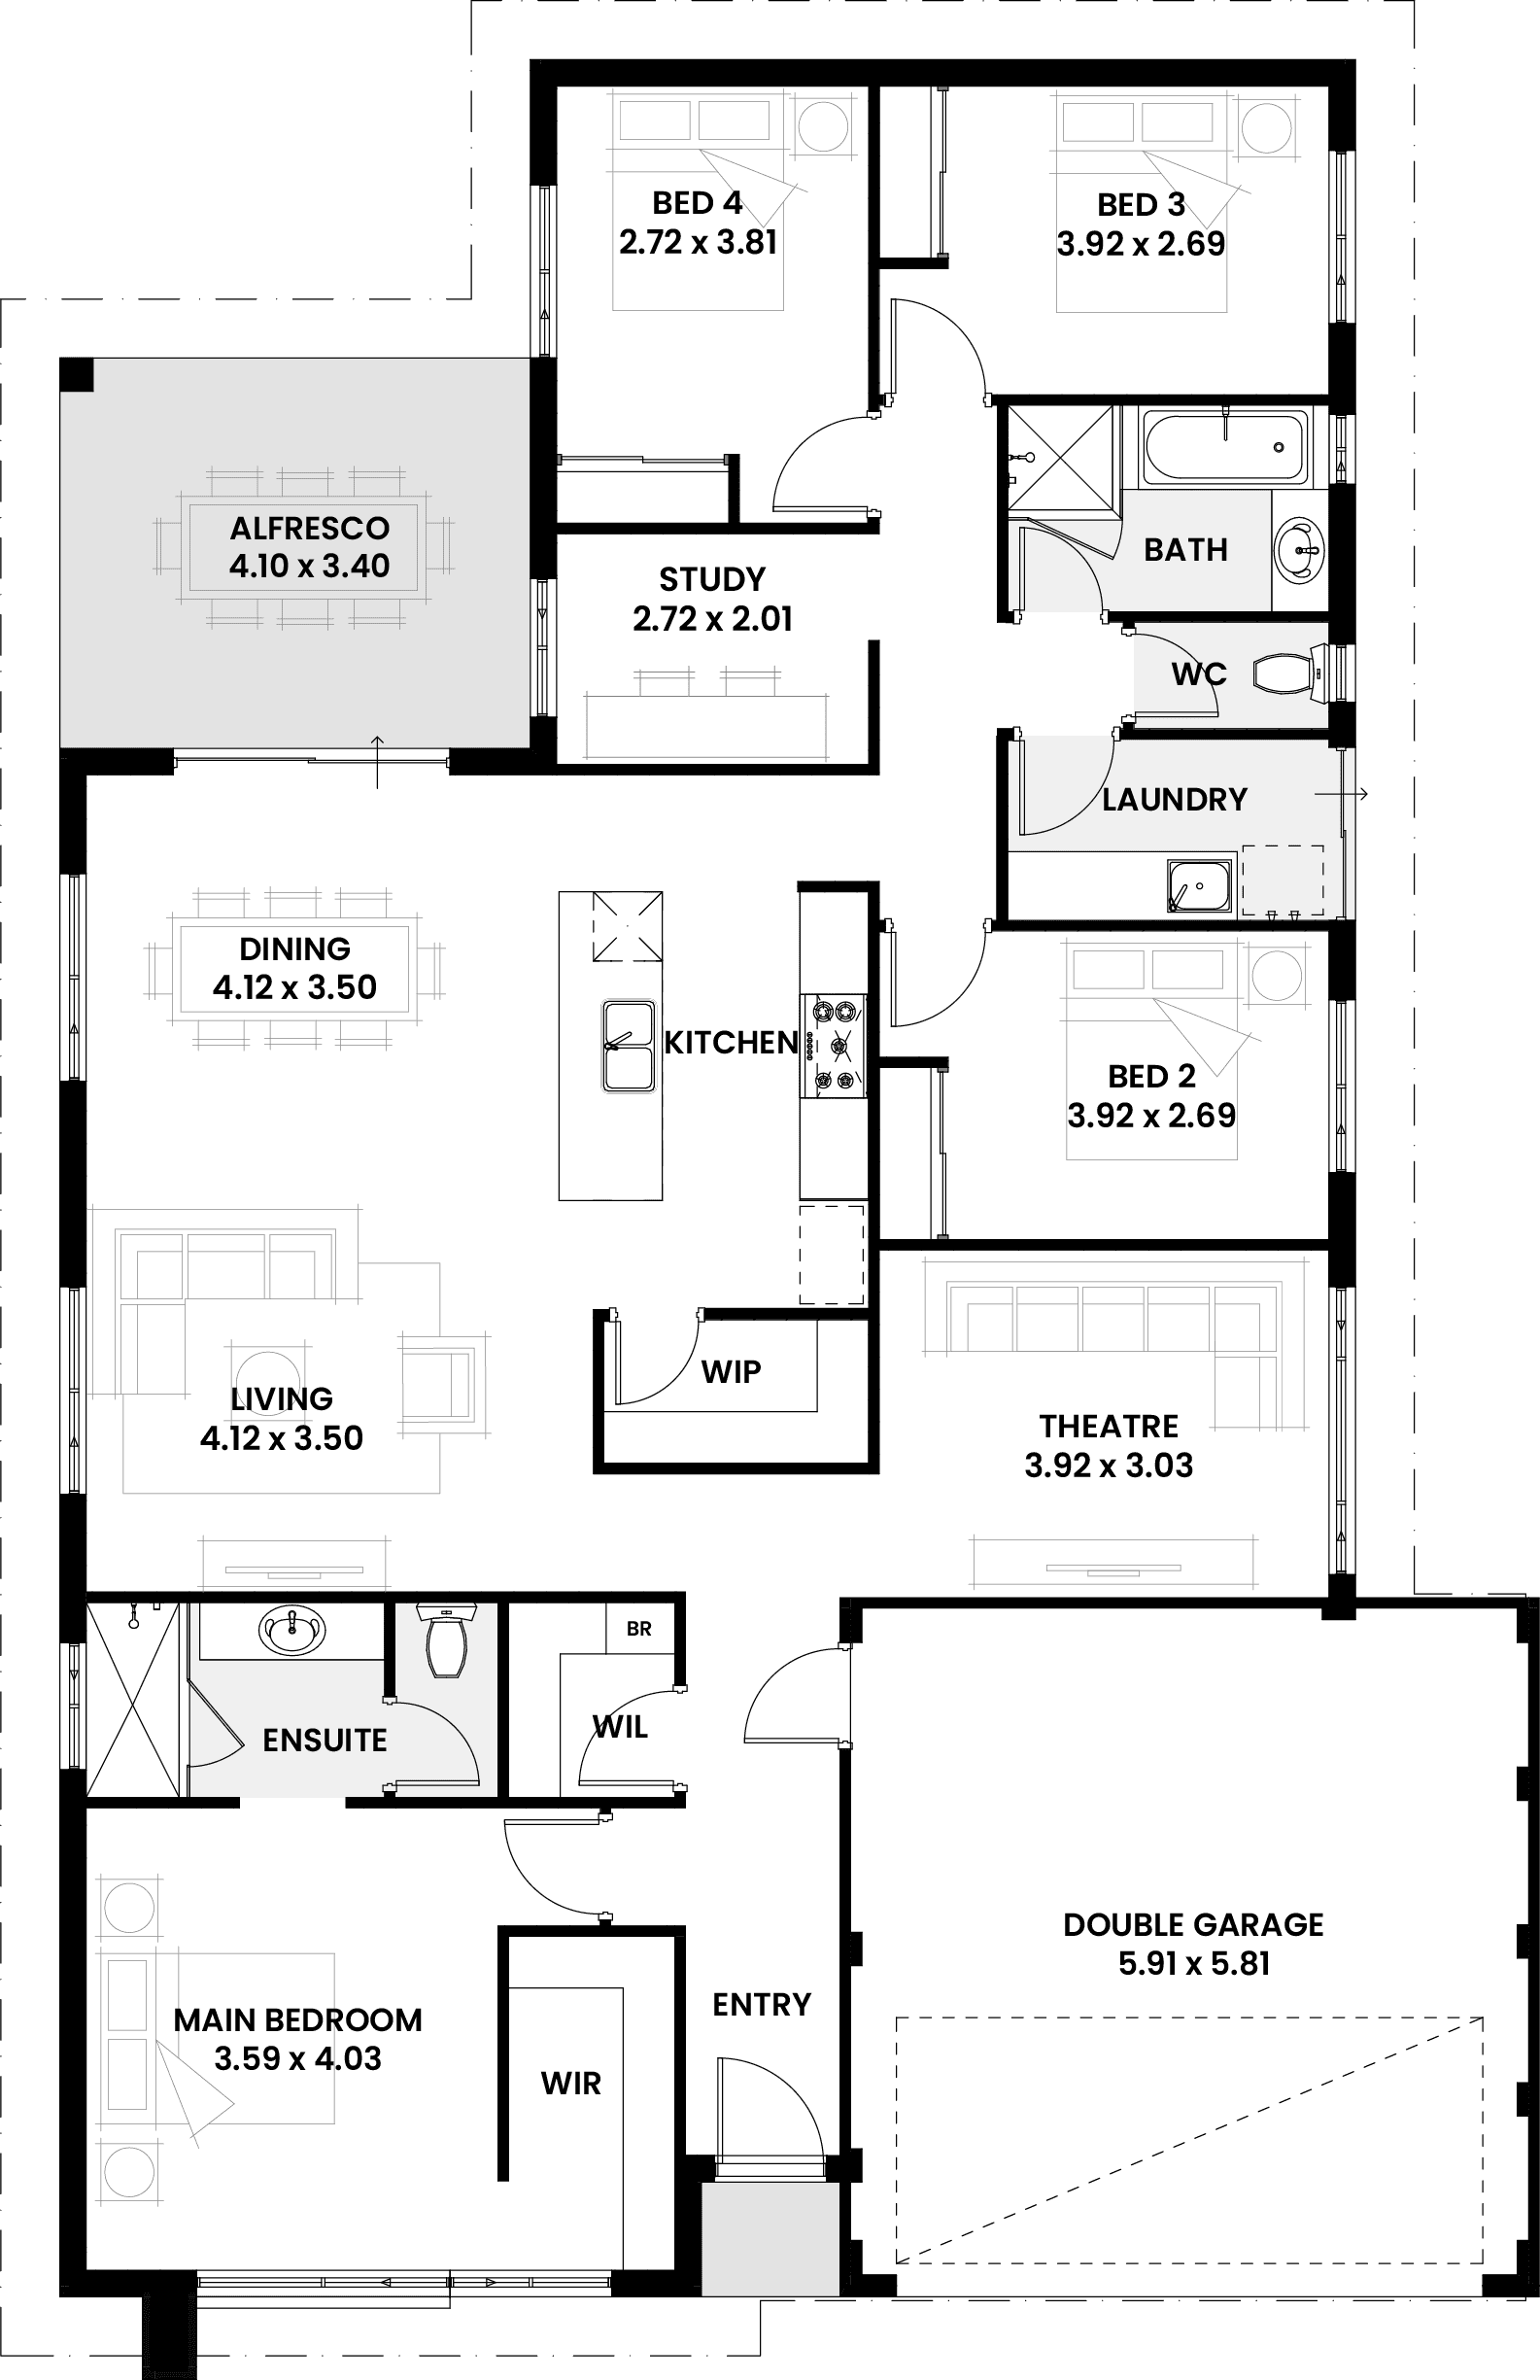 Floorplan for The Ironwood, a Move Homes new home design perfect for first time buyers and new builders in Perth